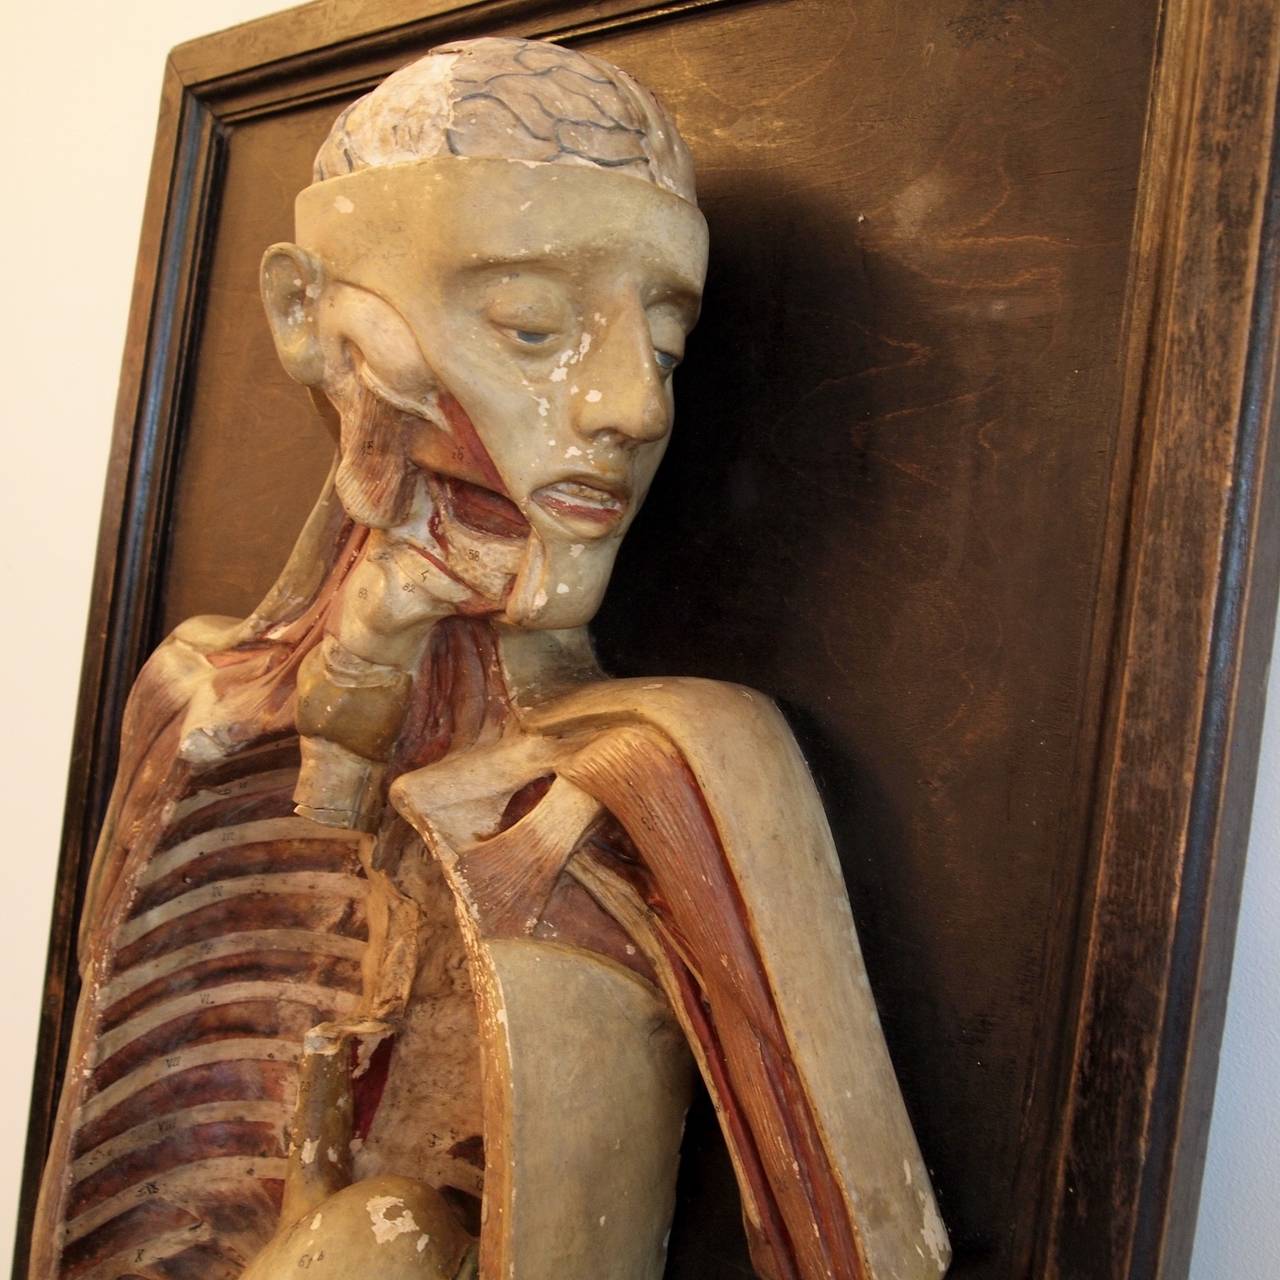 Full torso dissection model, with exposed ribcage, digestive system and brain. Painted plaster on a dark-stained timber backboard.